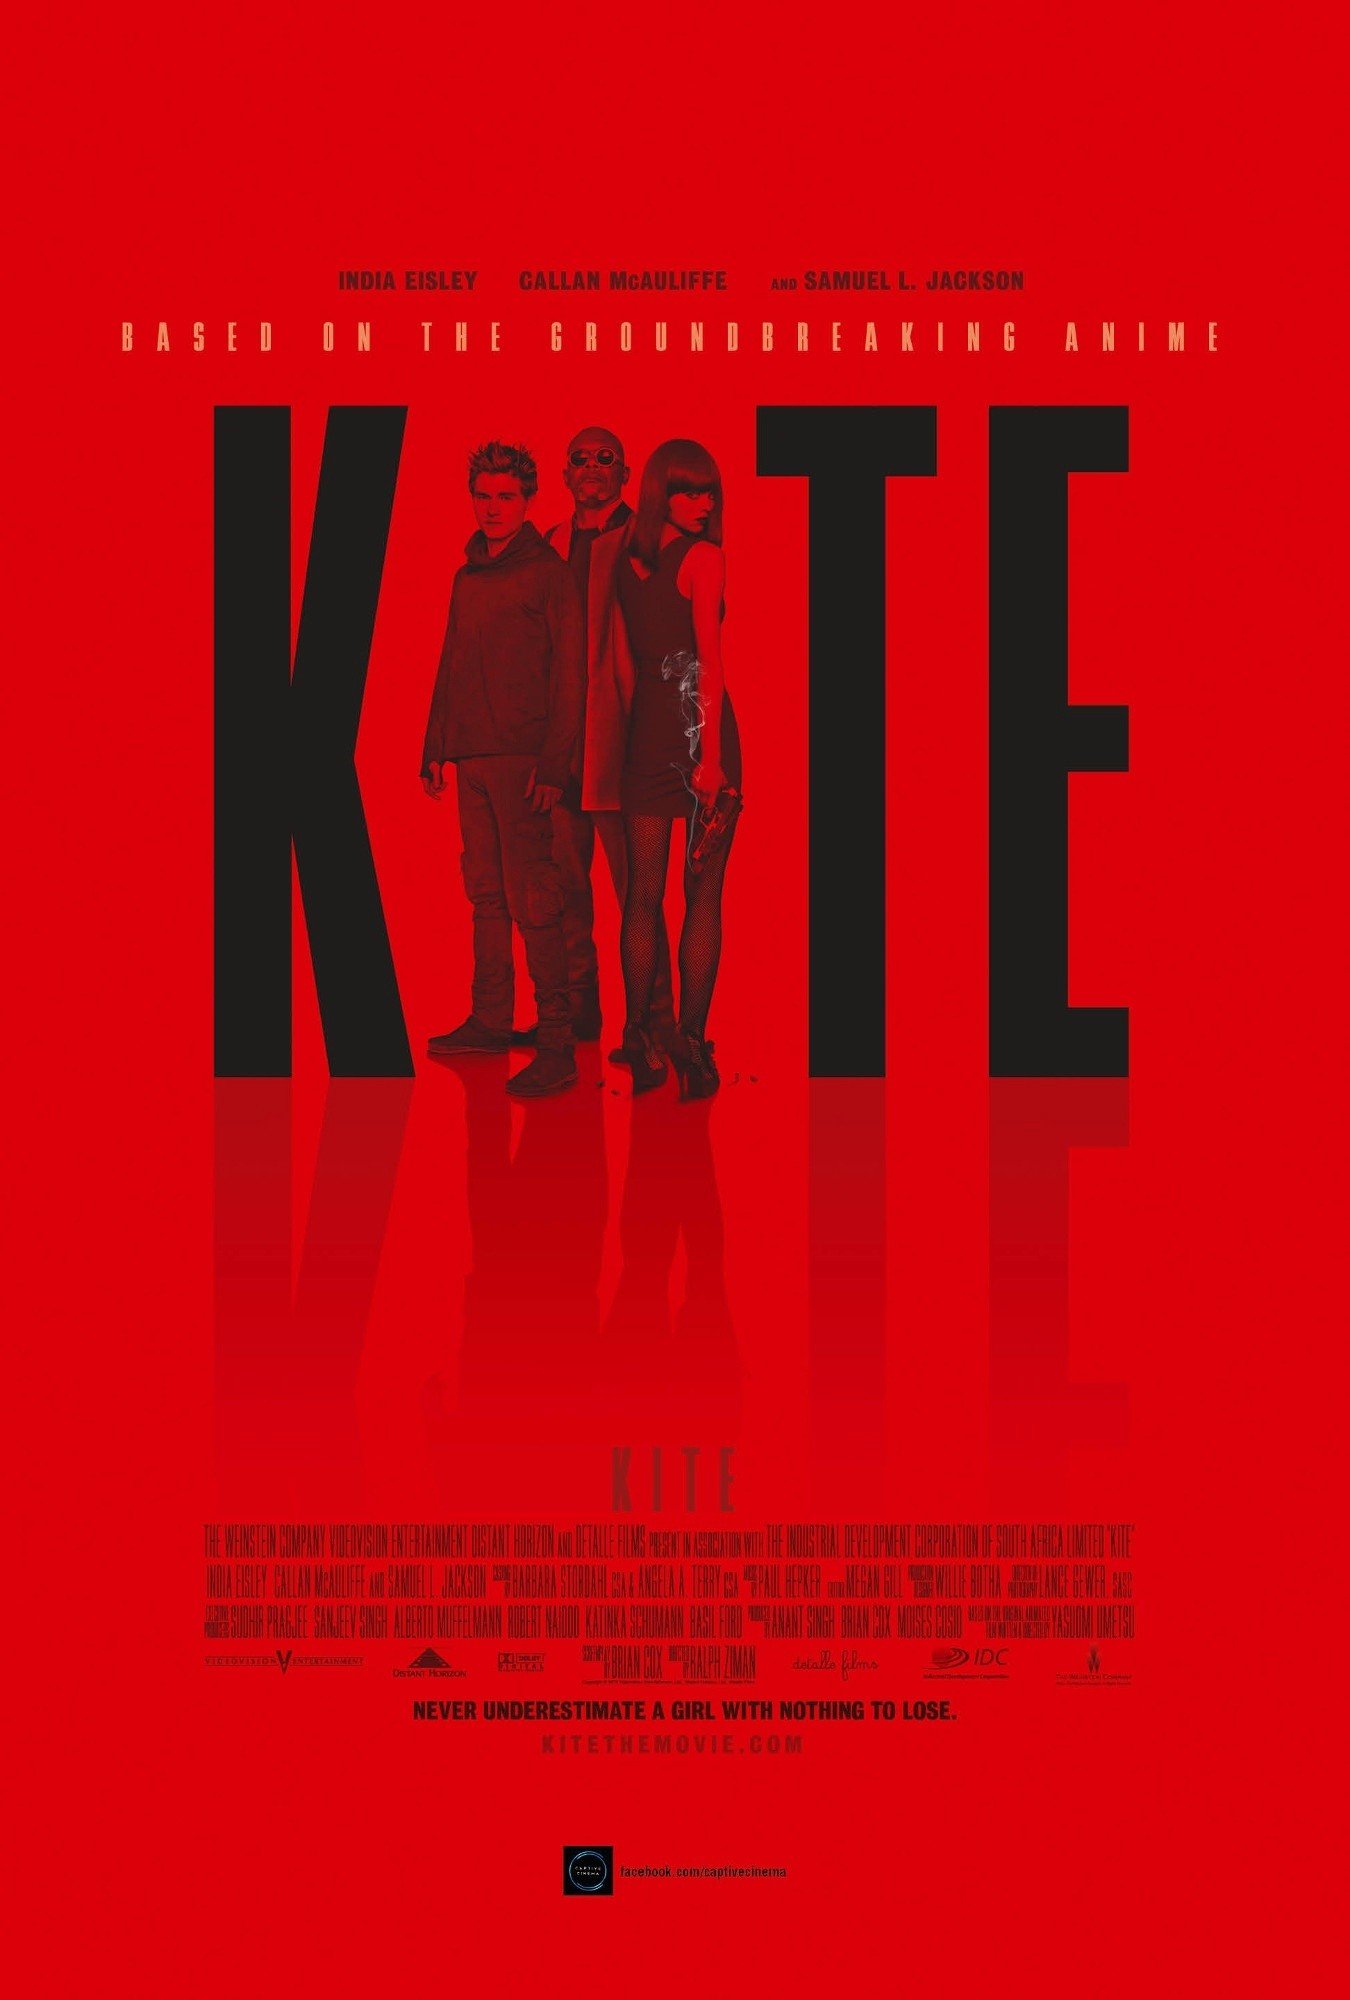 Poster of Anchor Bay Entertainment's Kite (2014)